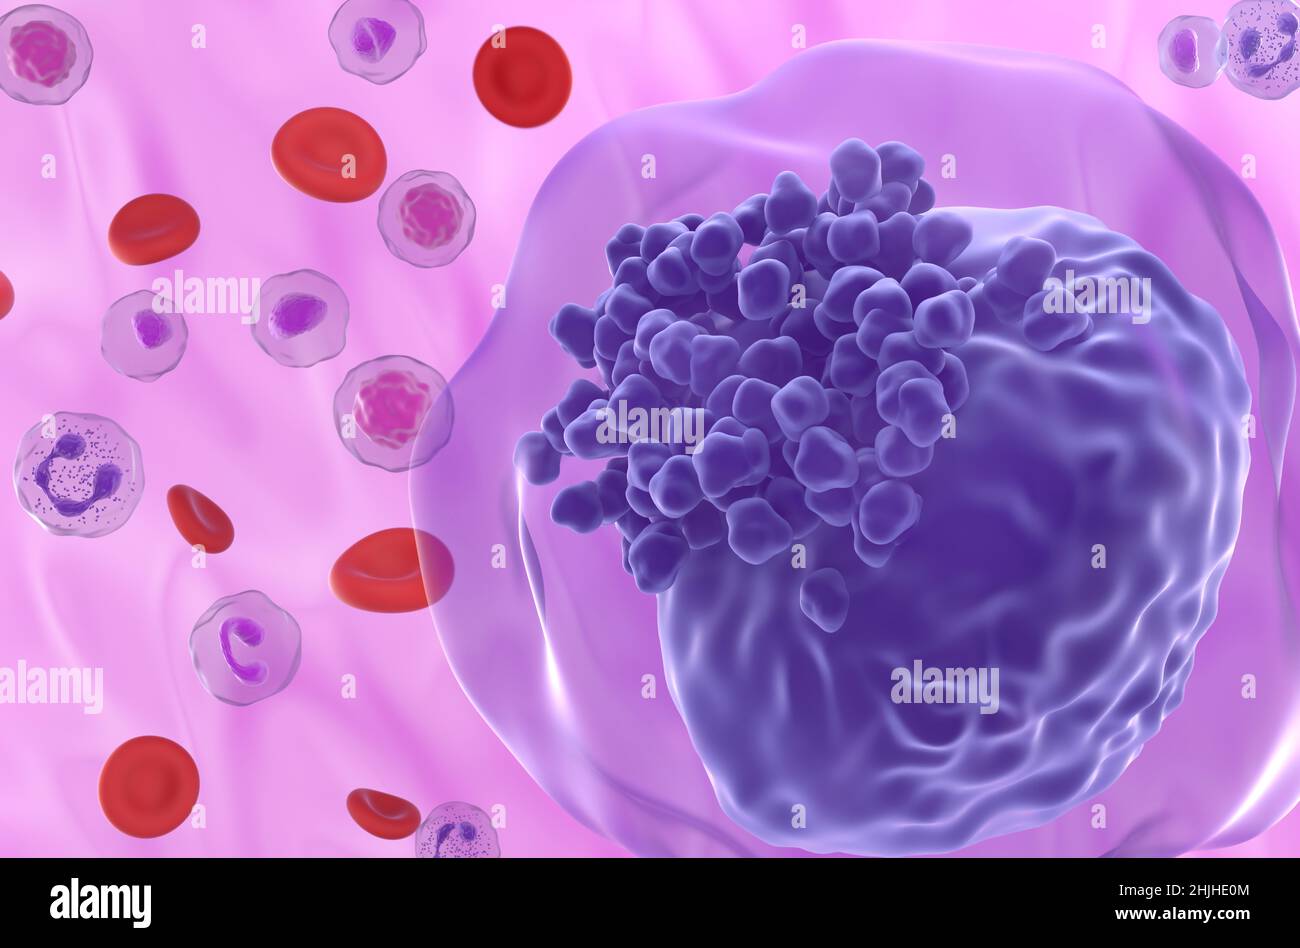 Acute myeloid leukemia (AML) cell in blood flow - super closeup view 3d illustration Stock Photo